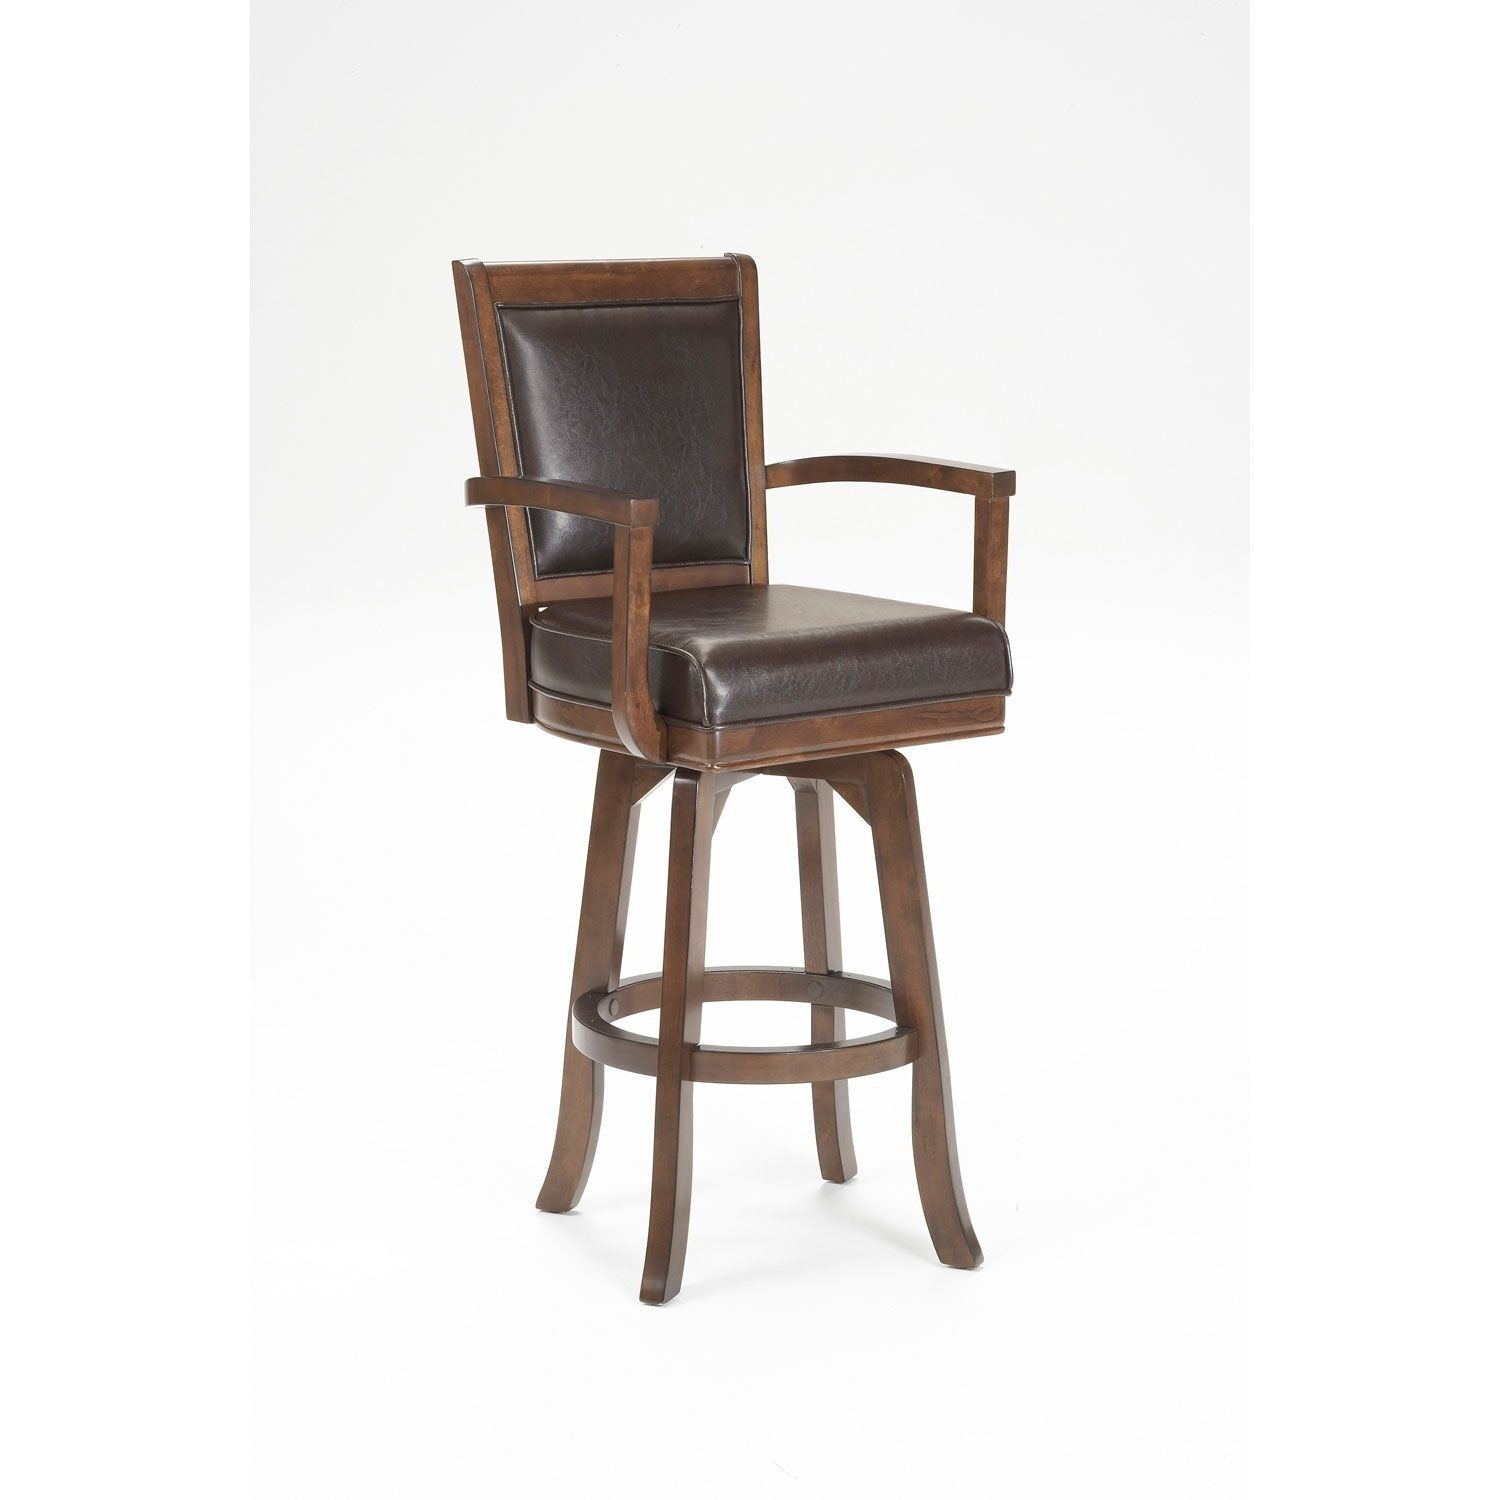 Hillsdale furniture palm springs 30 swivel bar stool with cushion